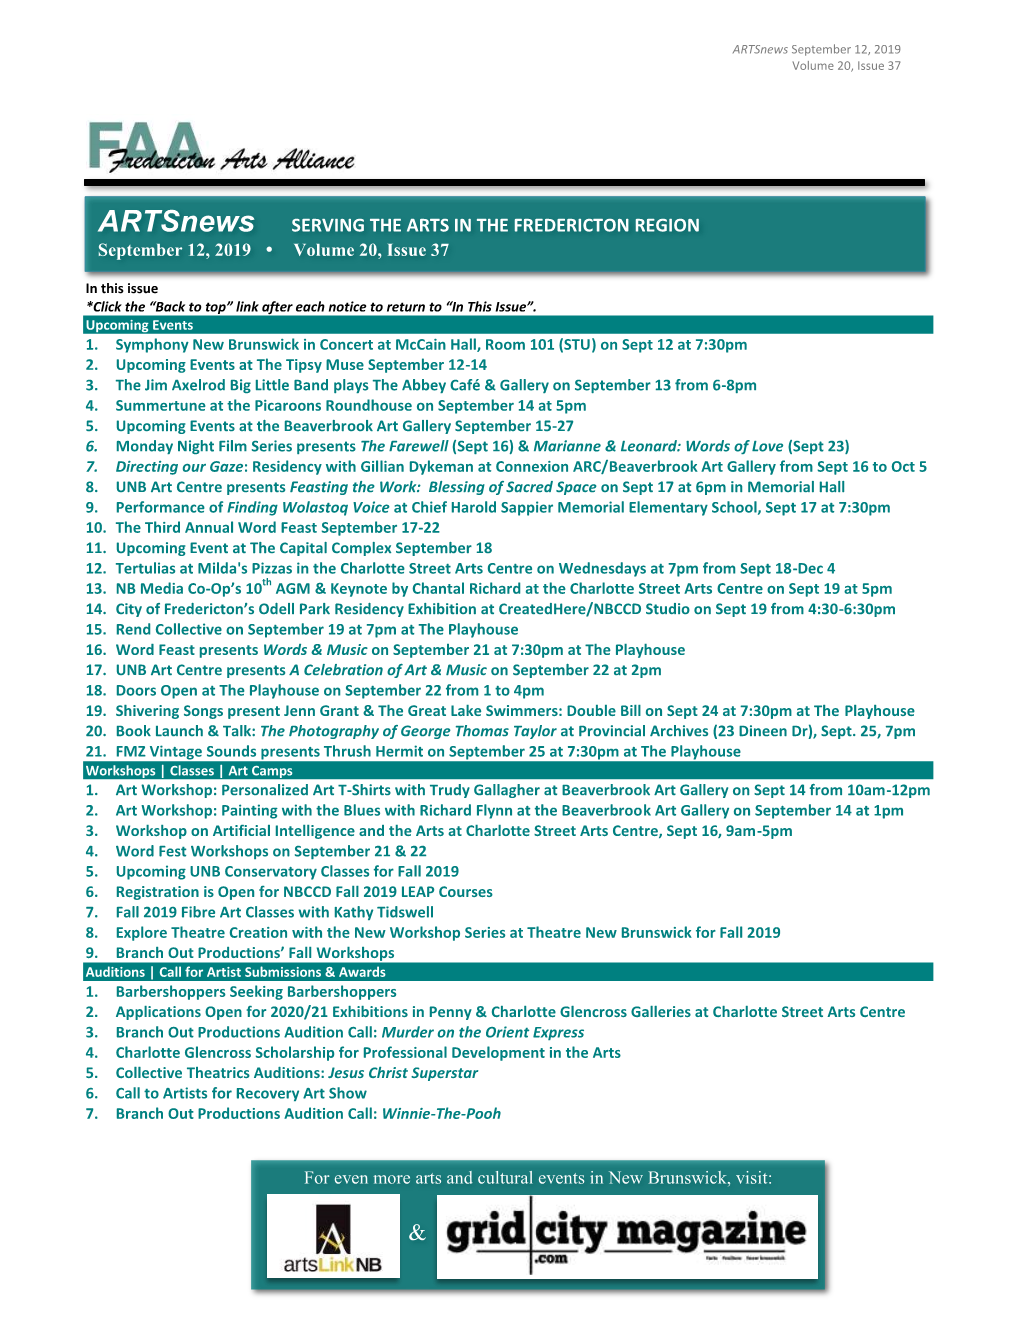 Artsnews SERVING the ARTS in the FREDERICTON REGION September 12, 2019 Volume 20, Issue 37